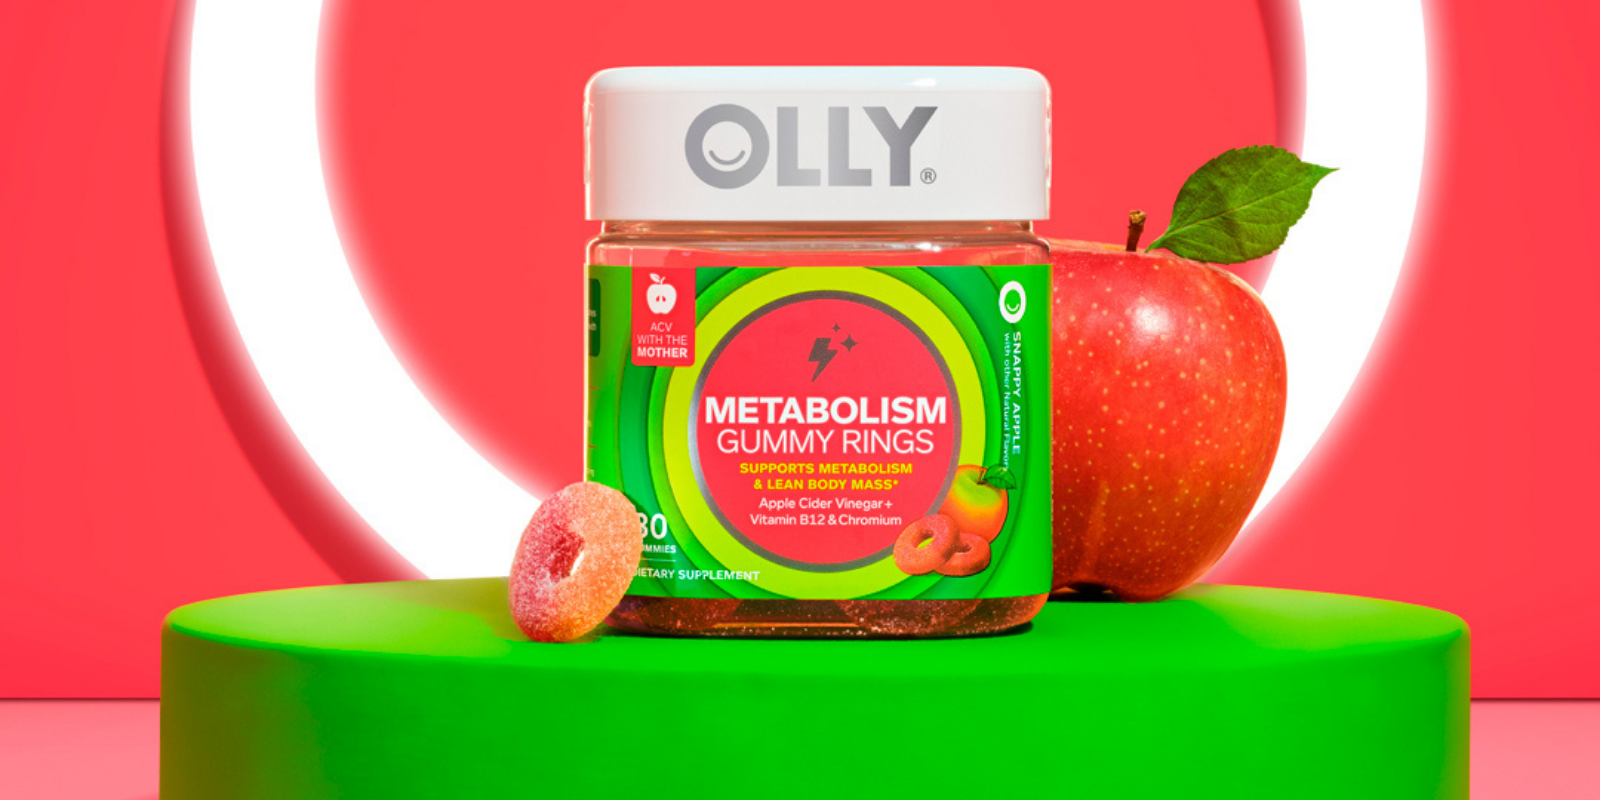 Marketing To Millennials: How Supplements Suddenly Became Cool